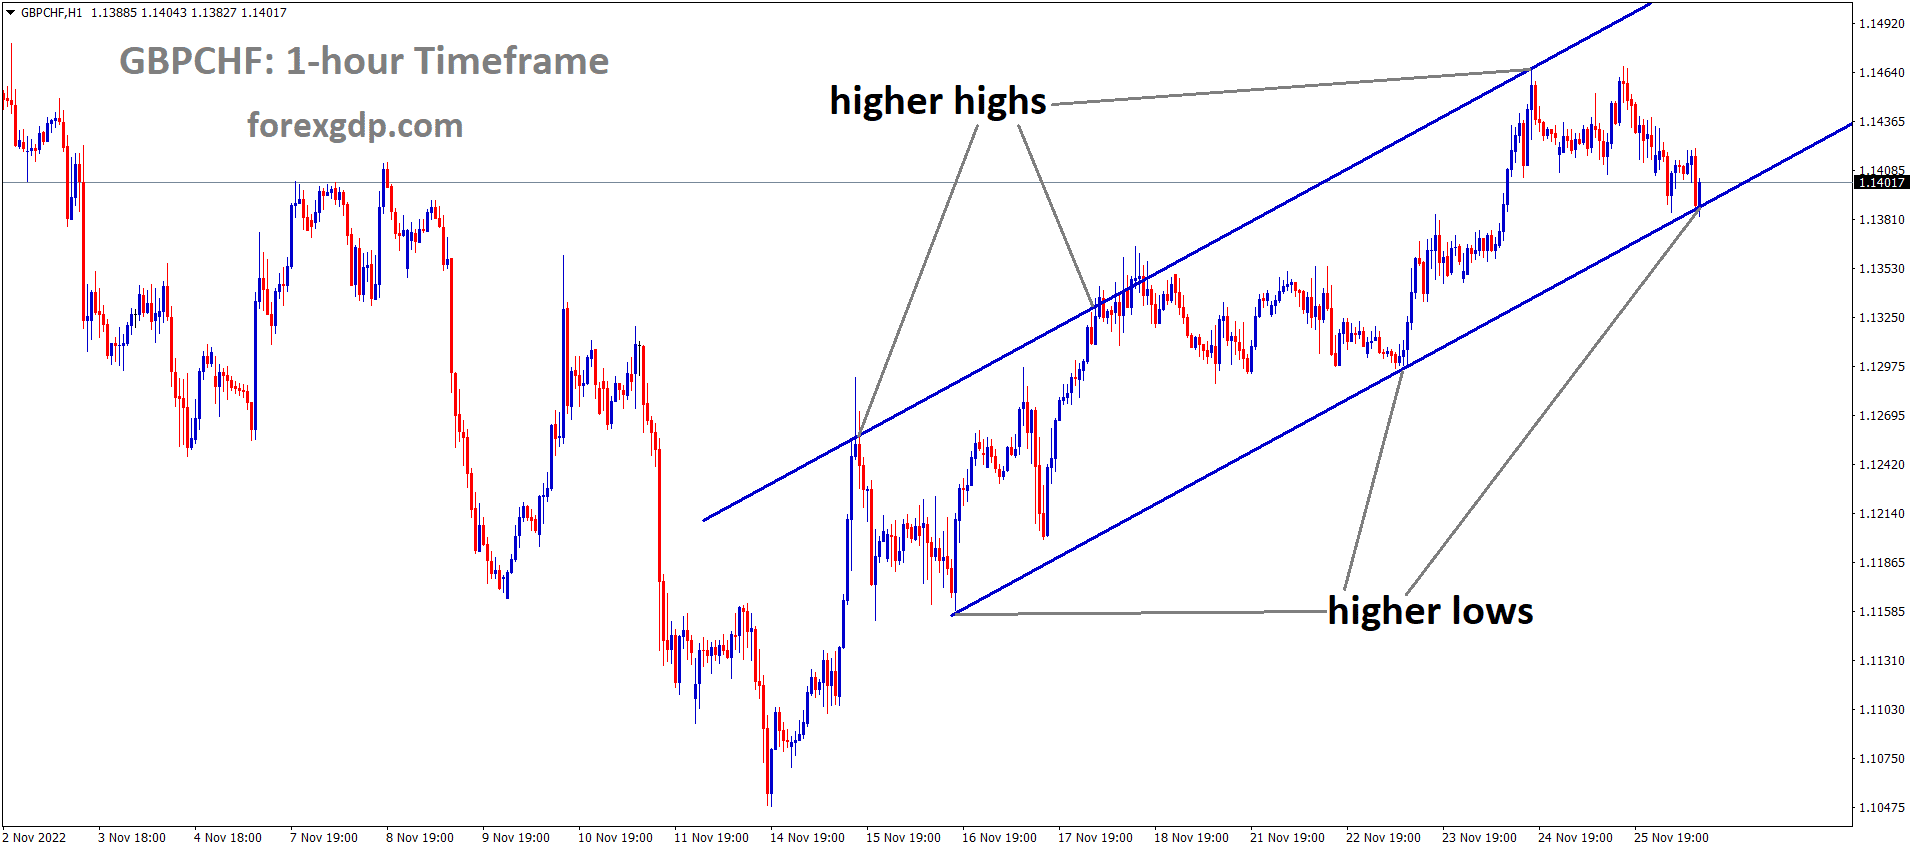 GBPCHF is moving in an Ascending channel and the market has rebounded from the higher low area of the channel